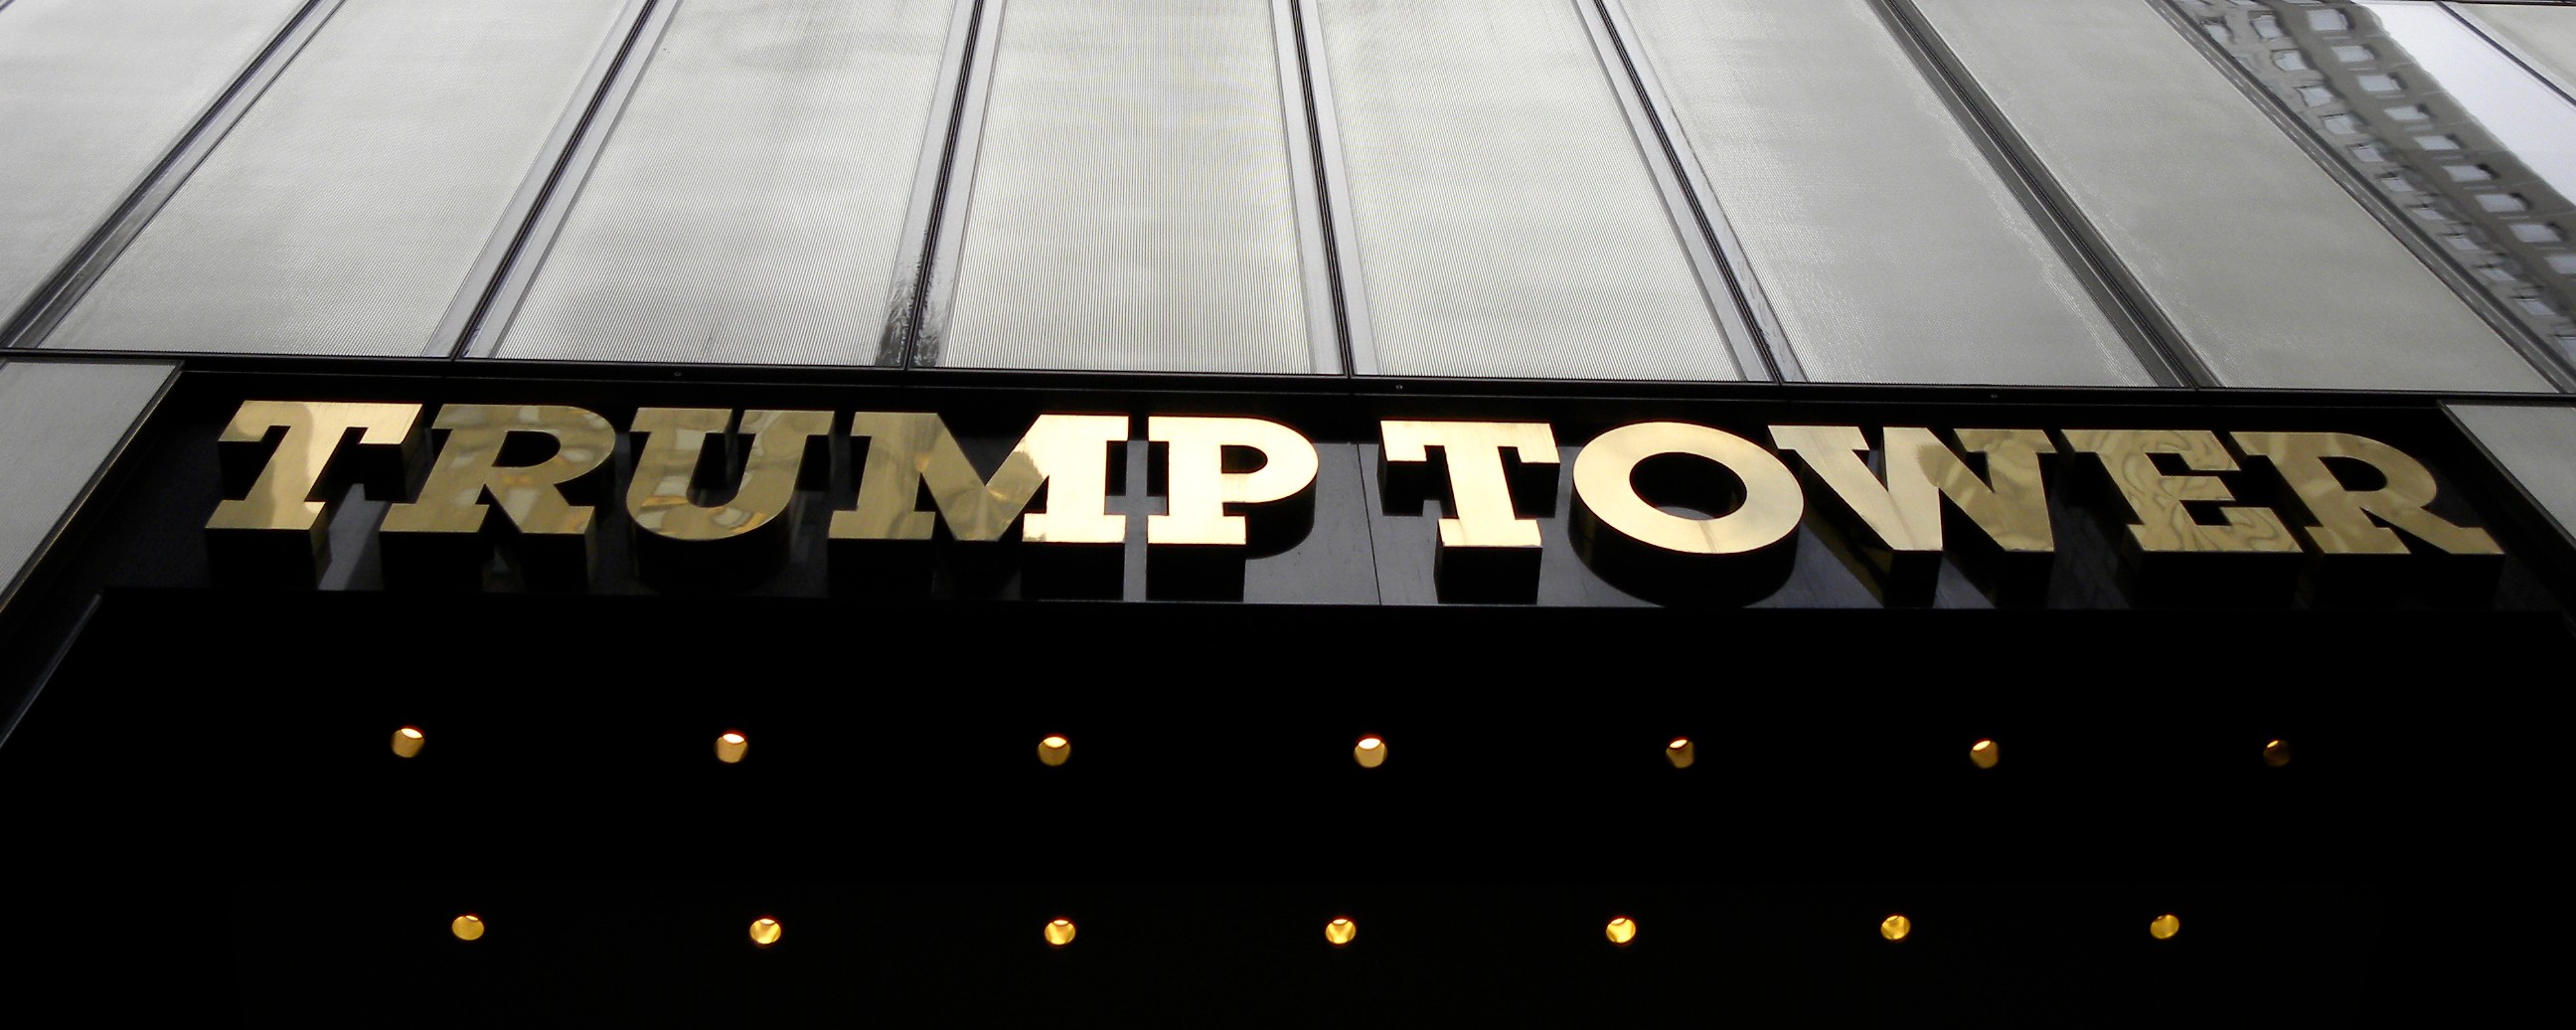 The Us Military Might Be Moving Into Trump Tower